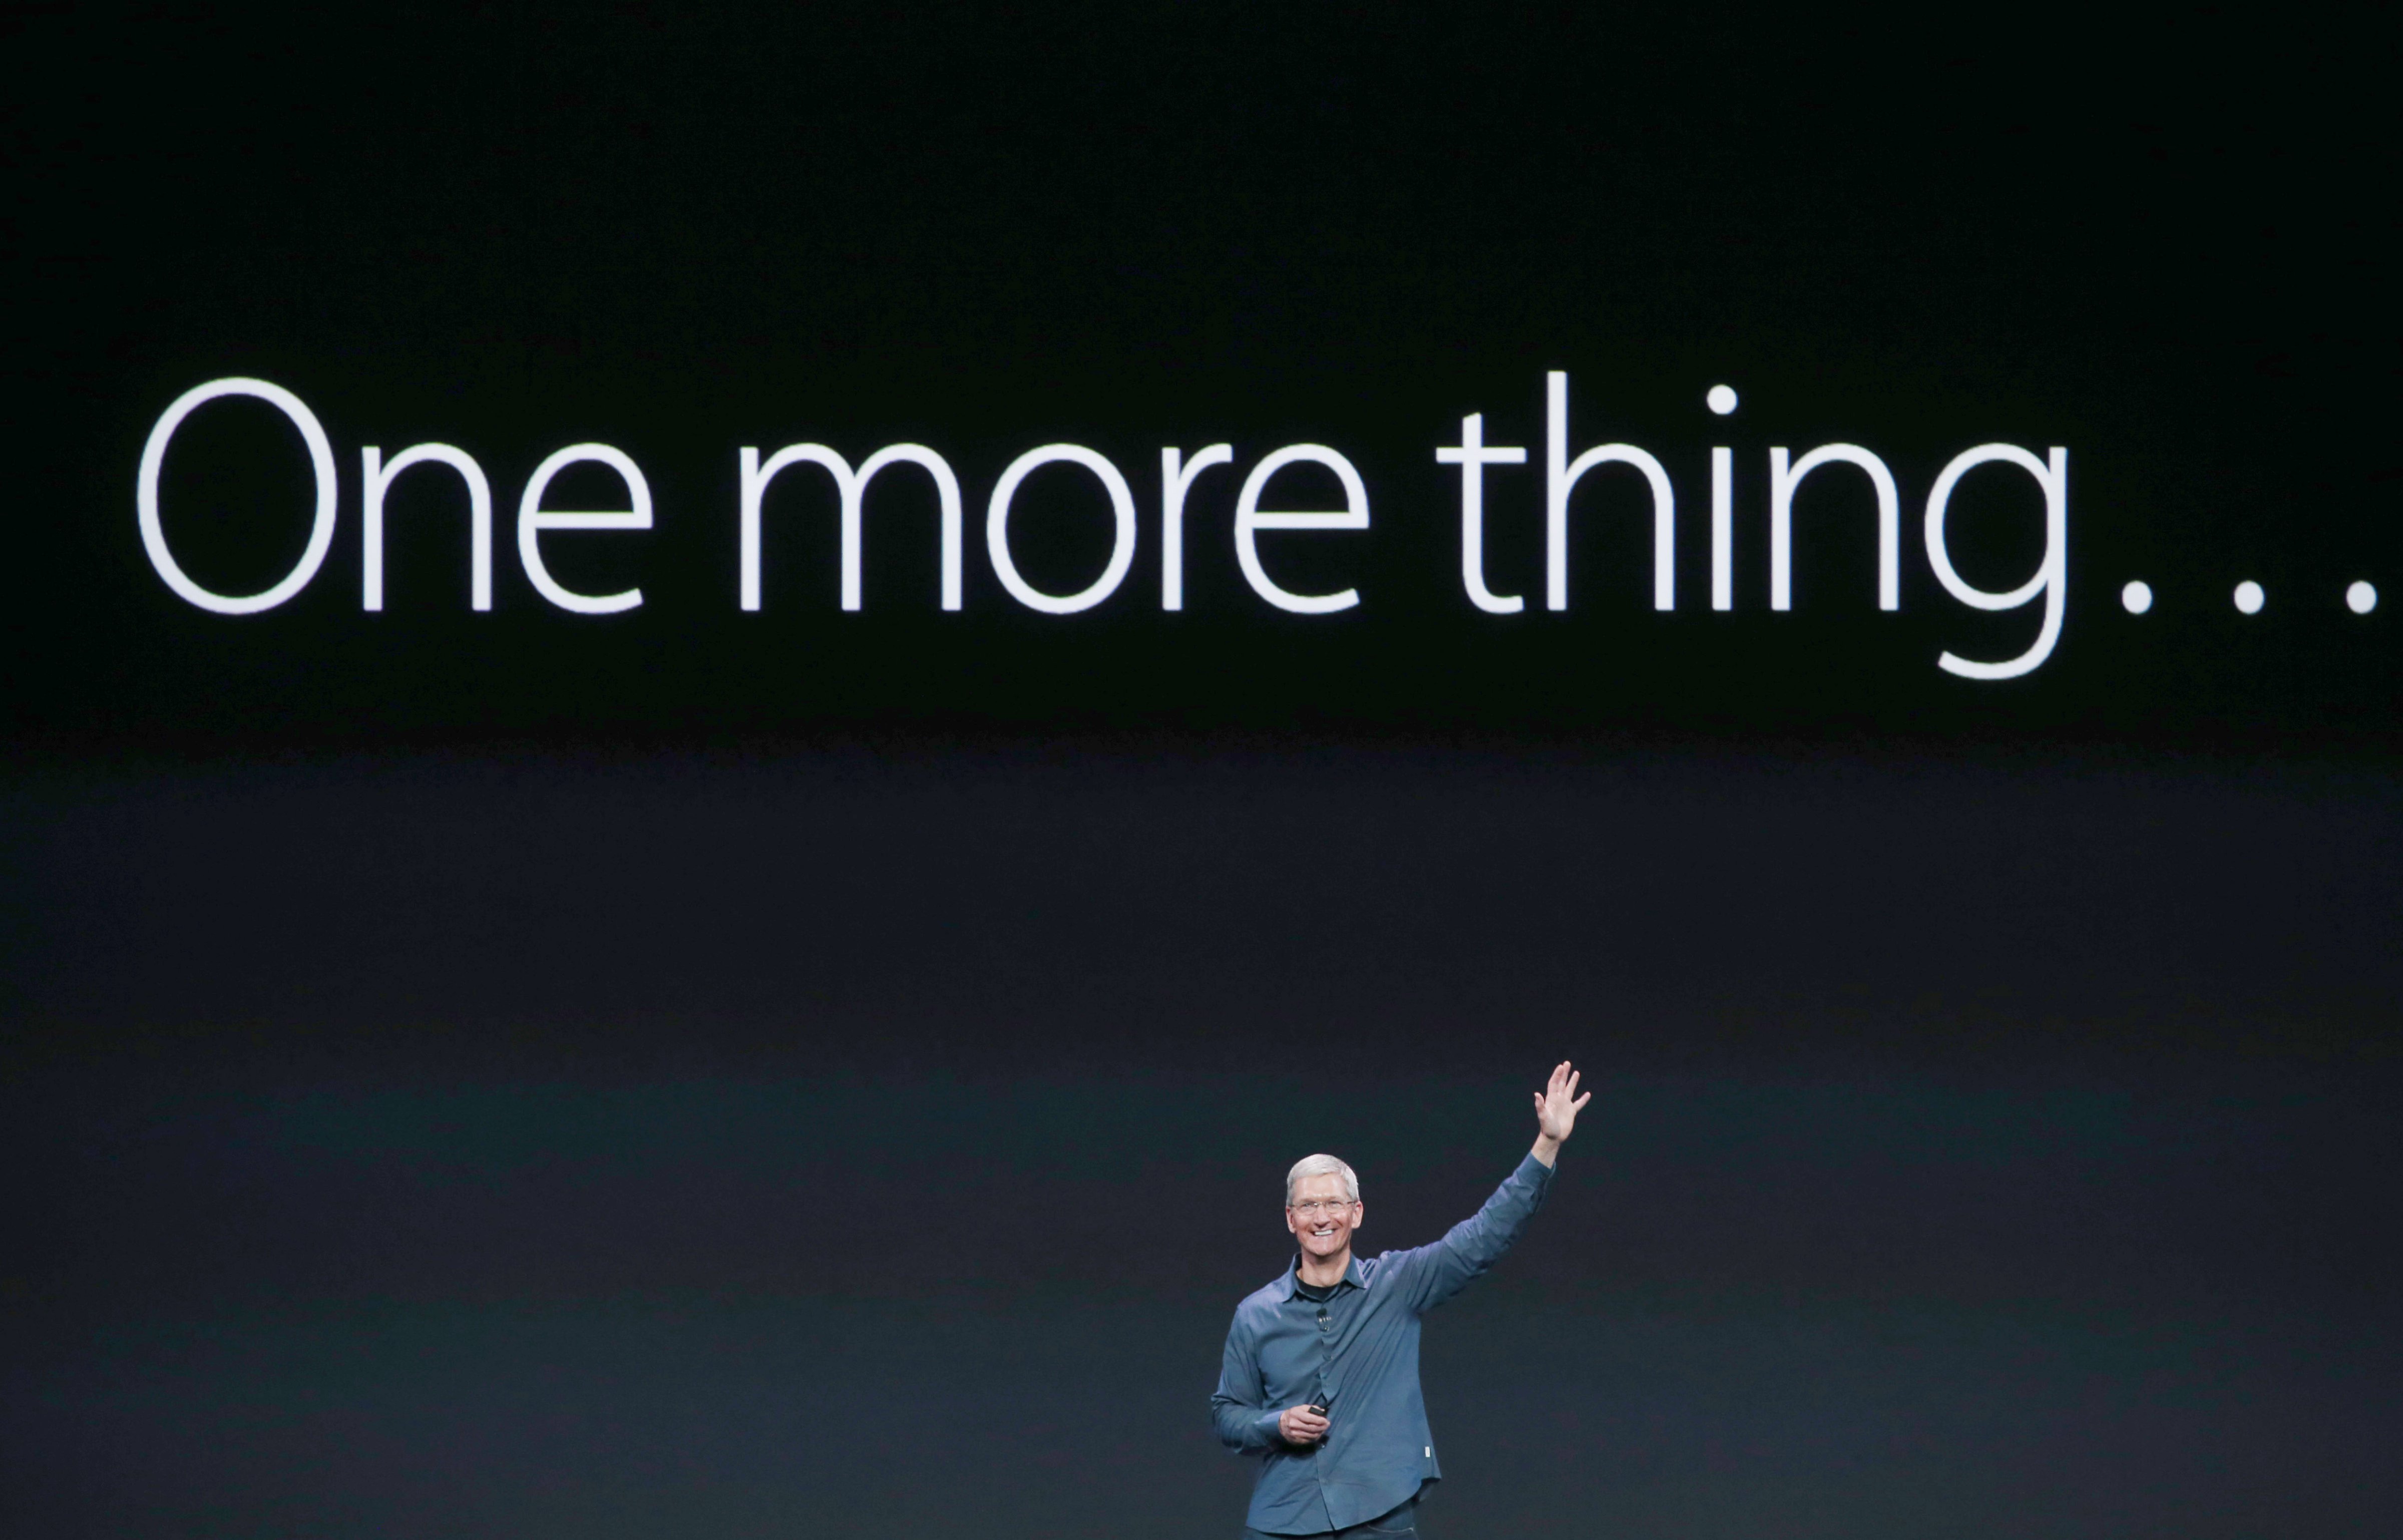 Apple CEO Tim Cook announces the Apple Watch during an Apple special event at the Flint Center for the Performing Arts on September 9, 2014 in Cupertino, California. (Justin Sullivan&mdash;Getty Images)